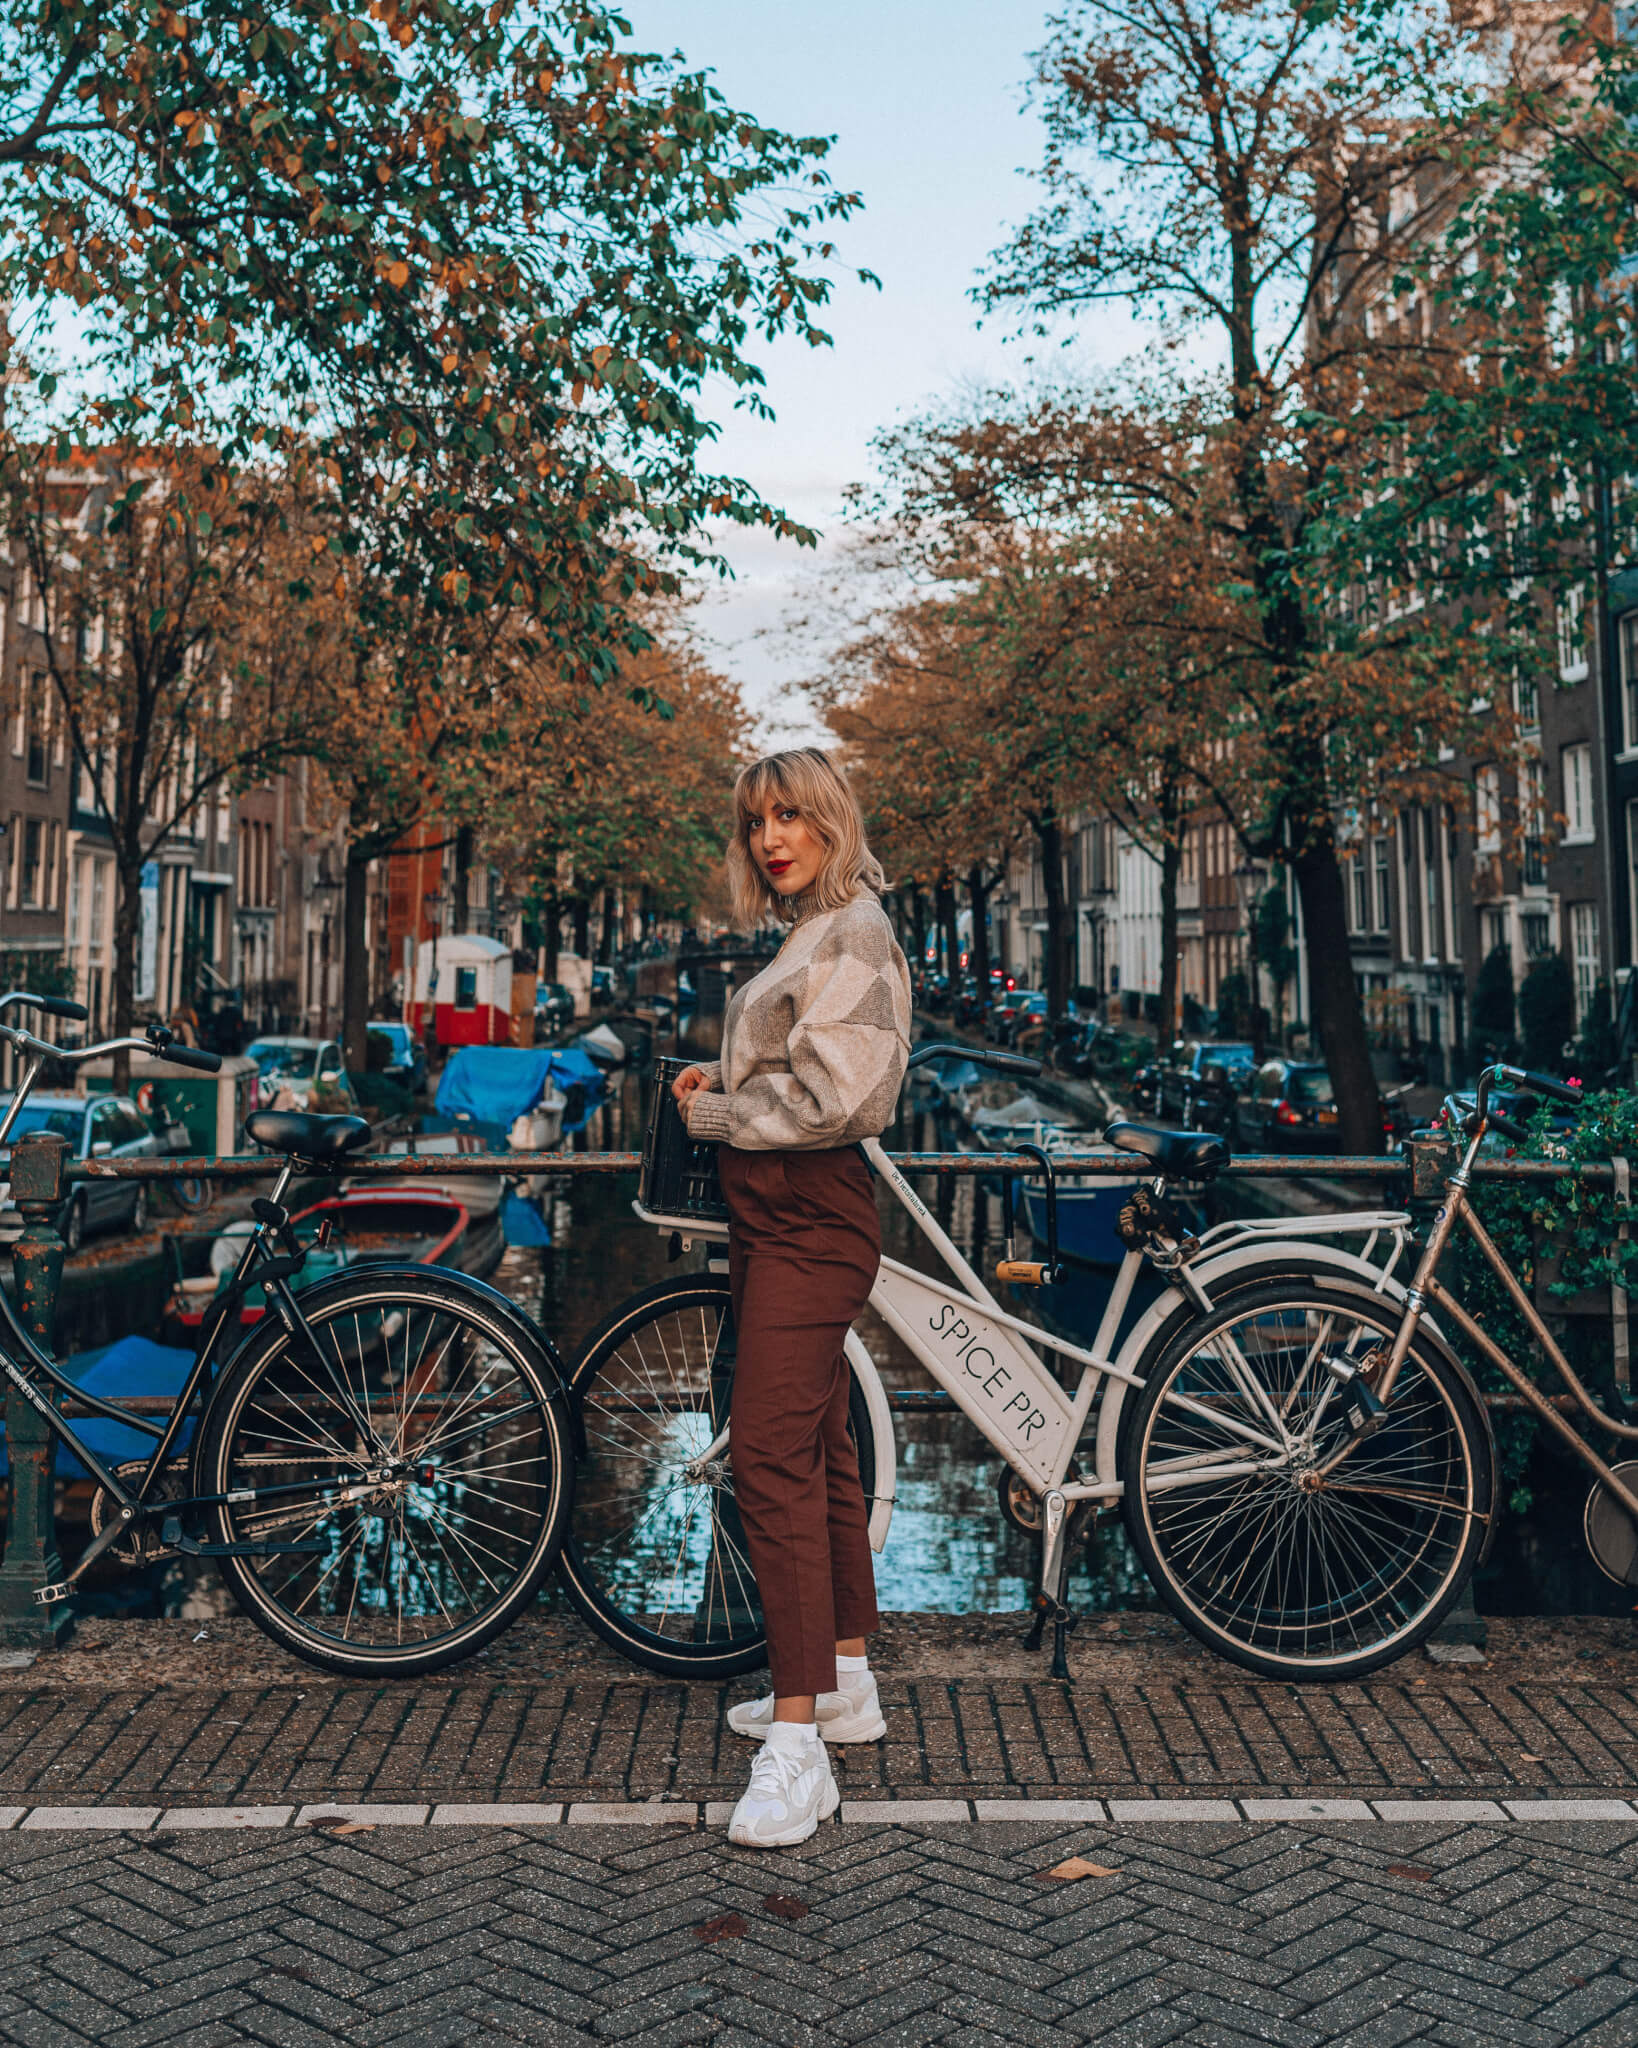 What to do in Amsterdam in 3 days